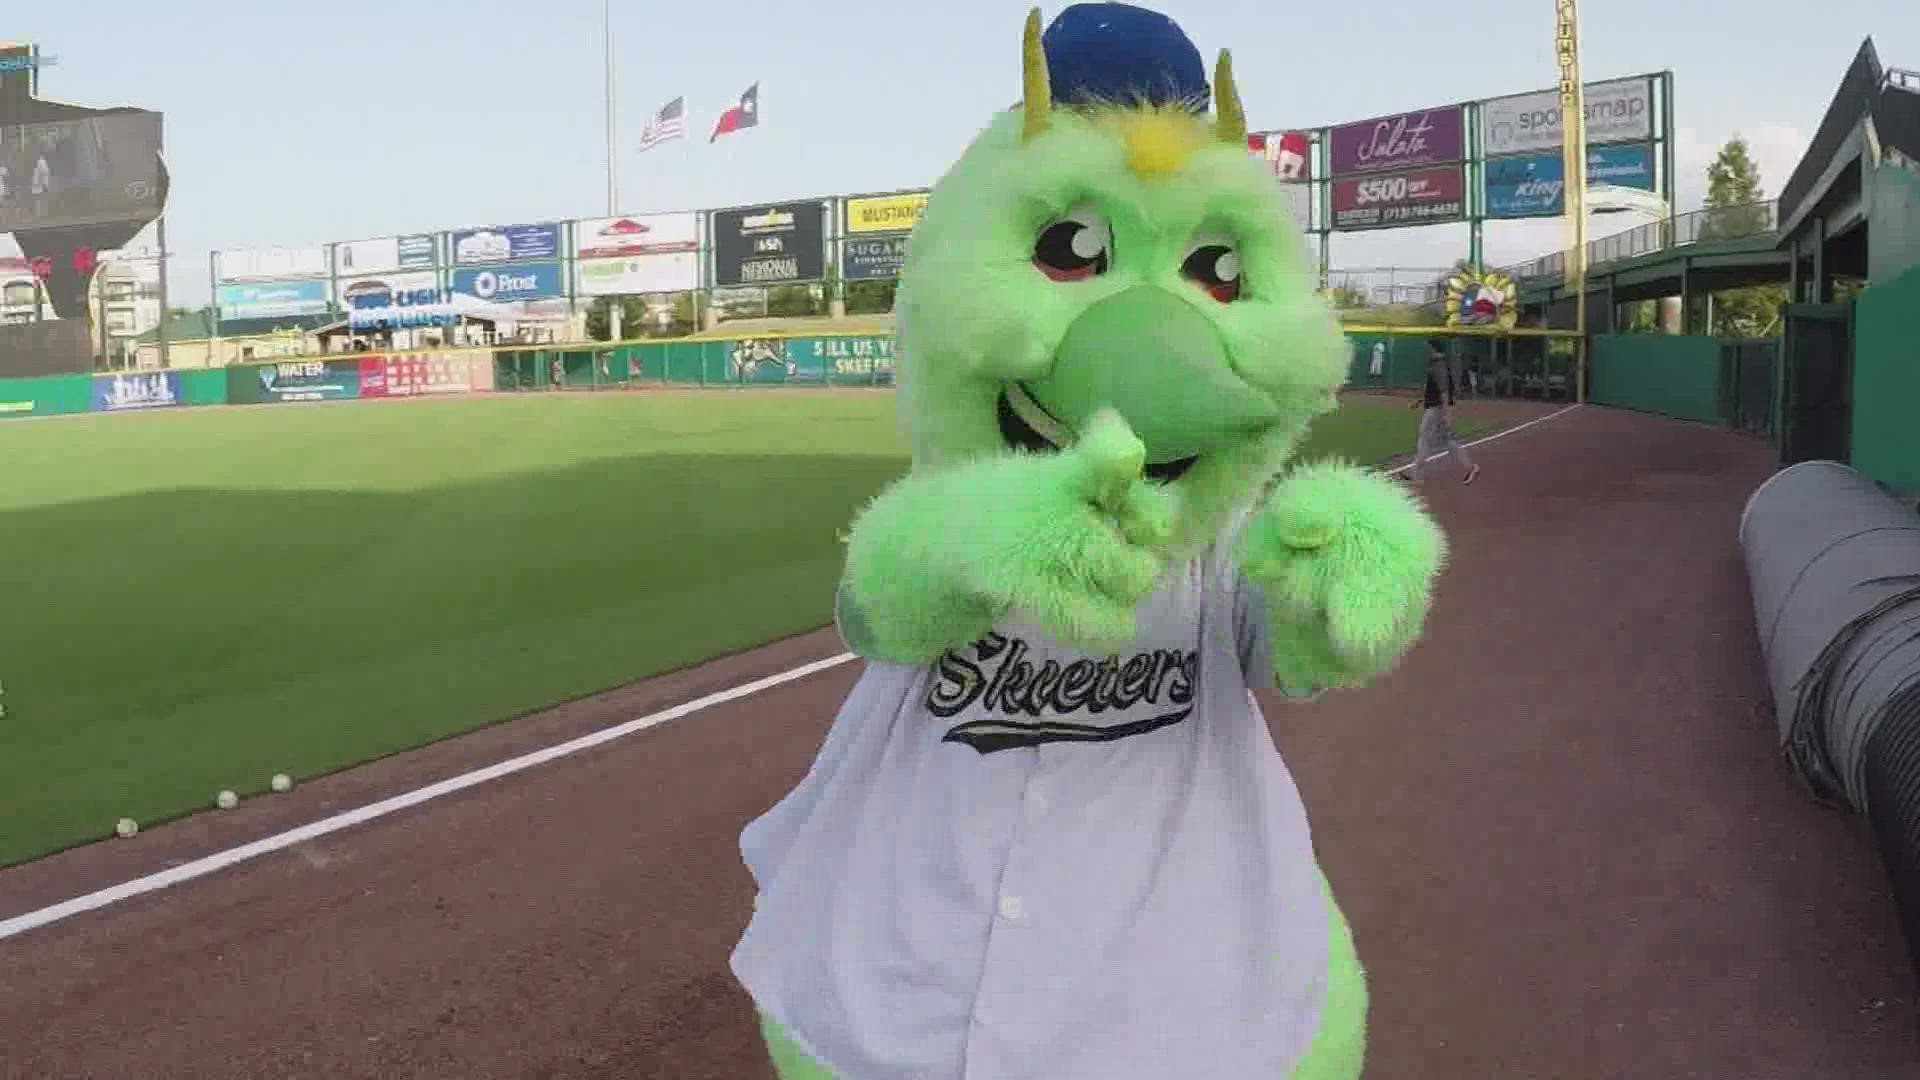 There will be a launch party at Constellation Field on Jan. 29 to reveal the team's new name, logo, mascot and uniform.